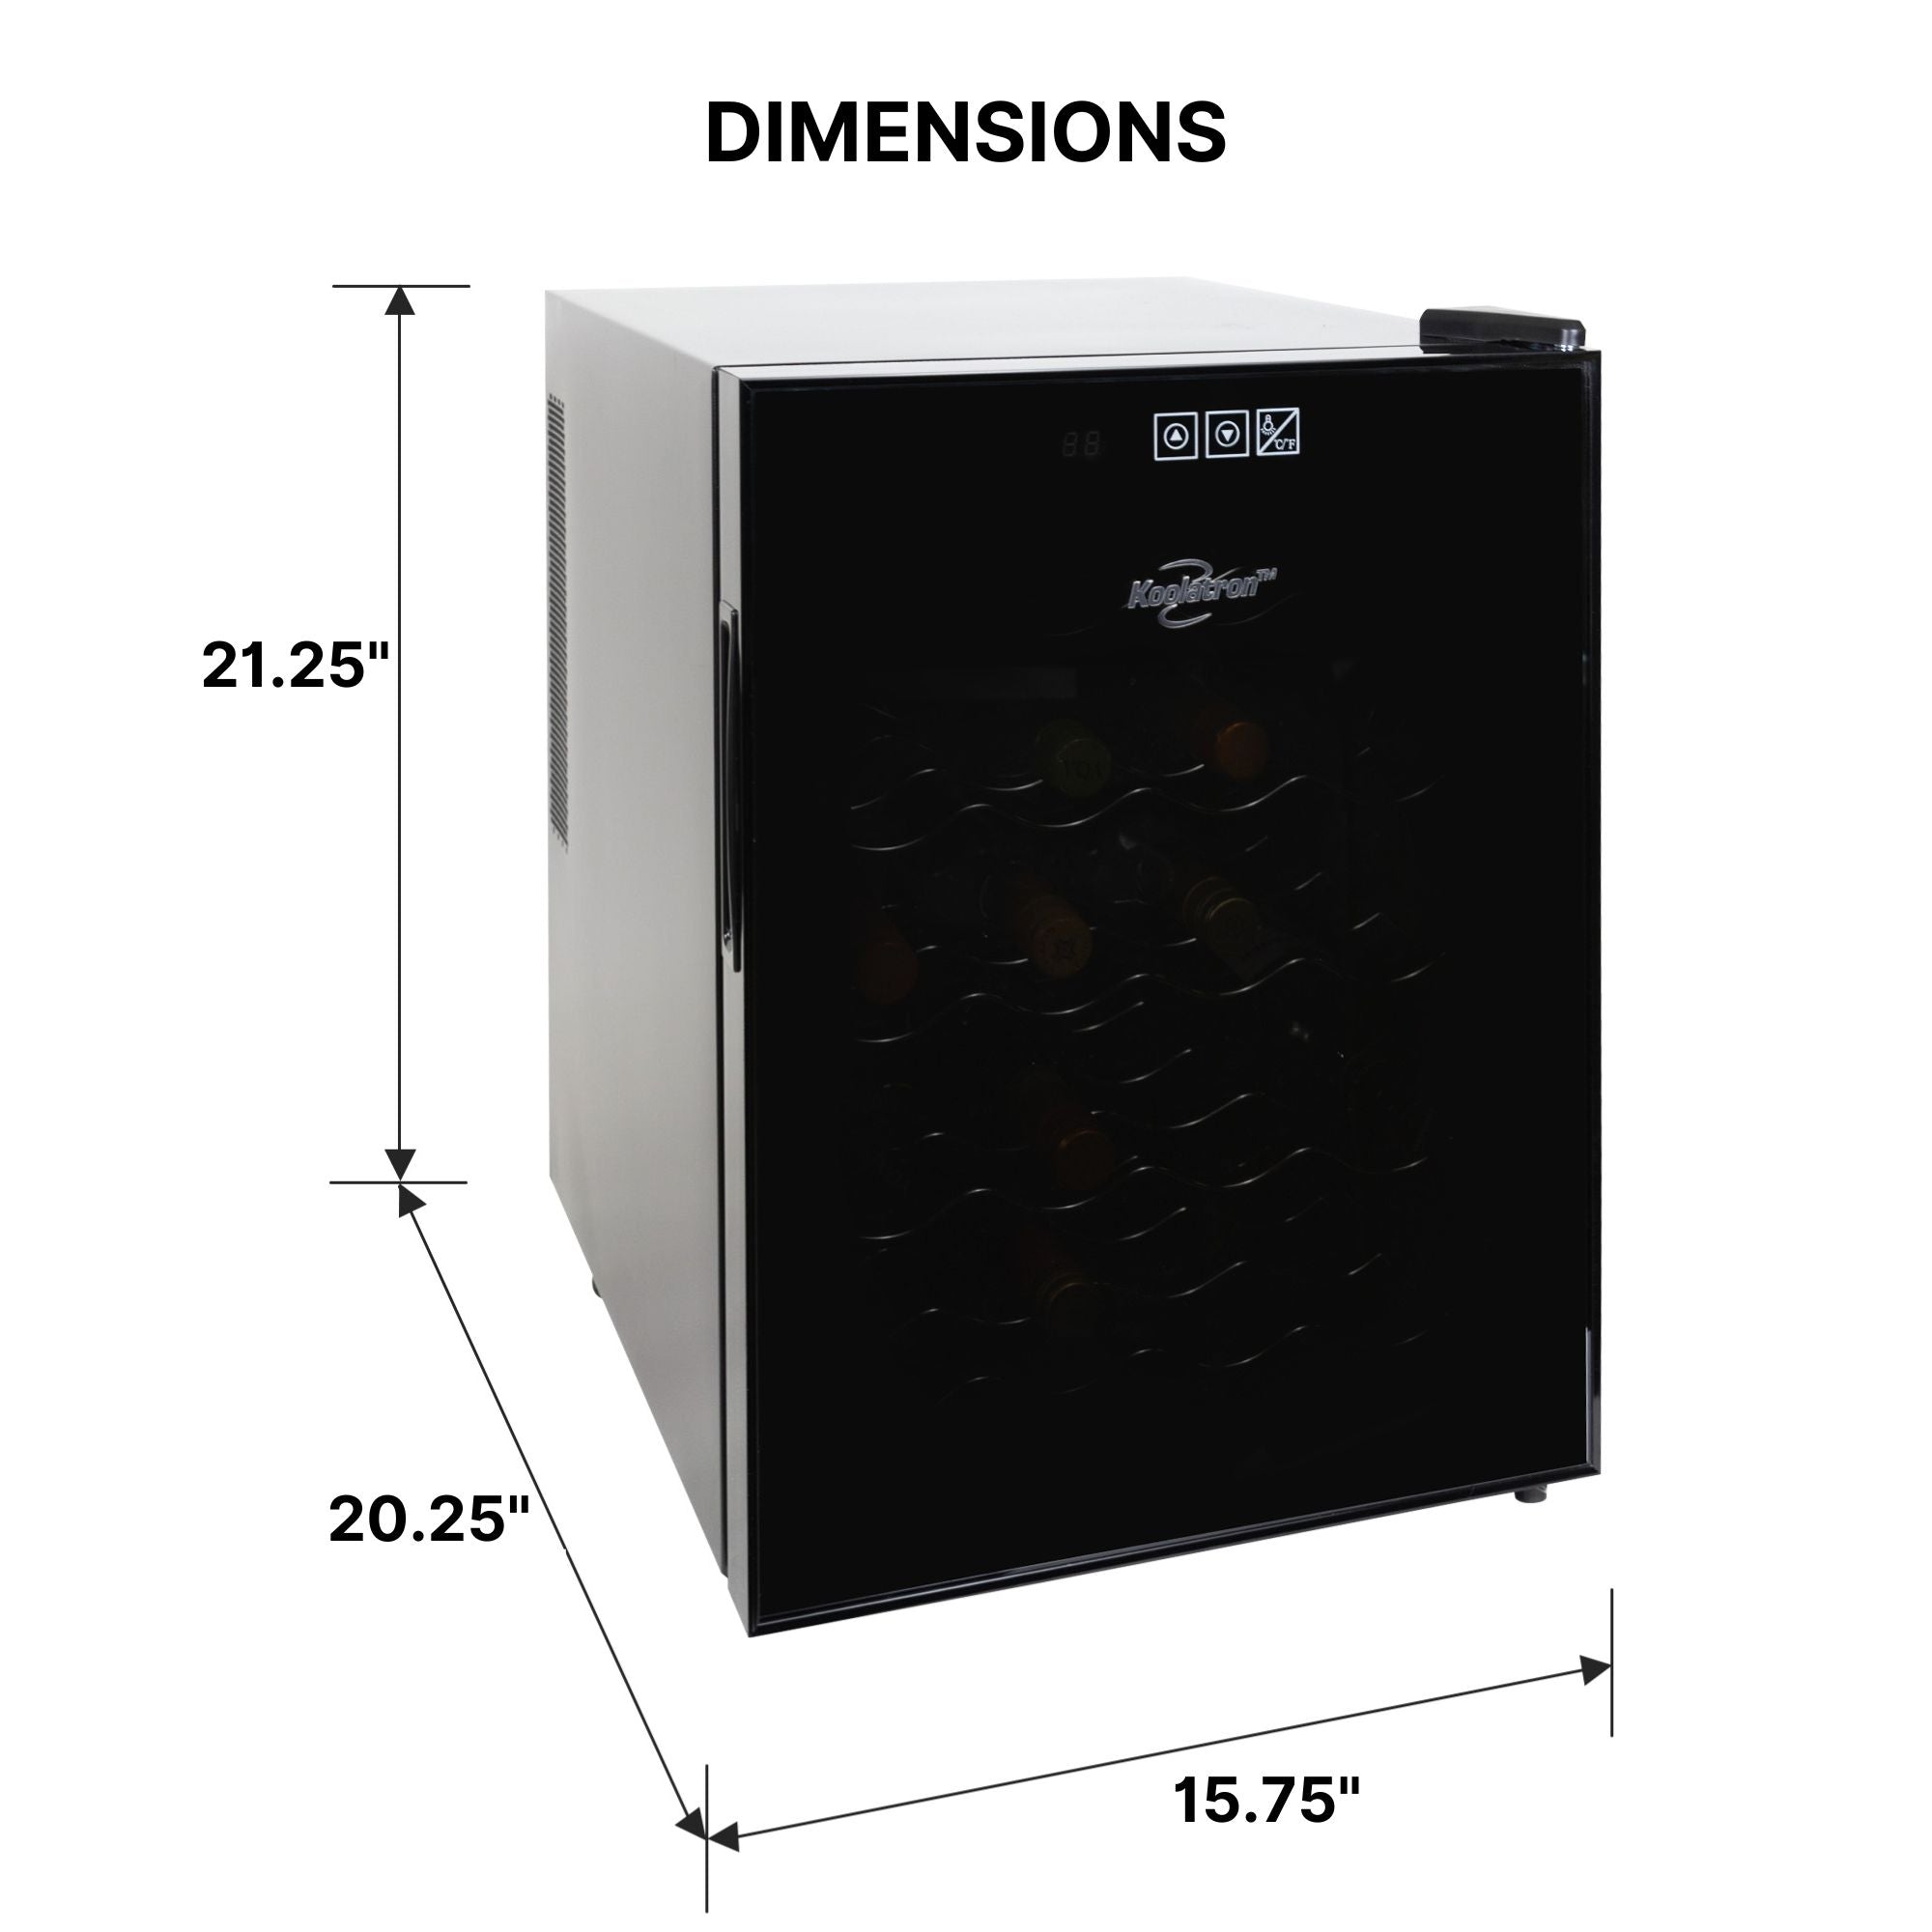 Koolatron 20 bottle thermoelectric wine fridge on a white background with dimensions labeled